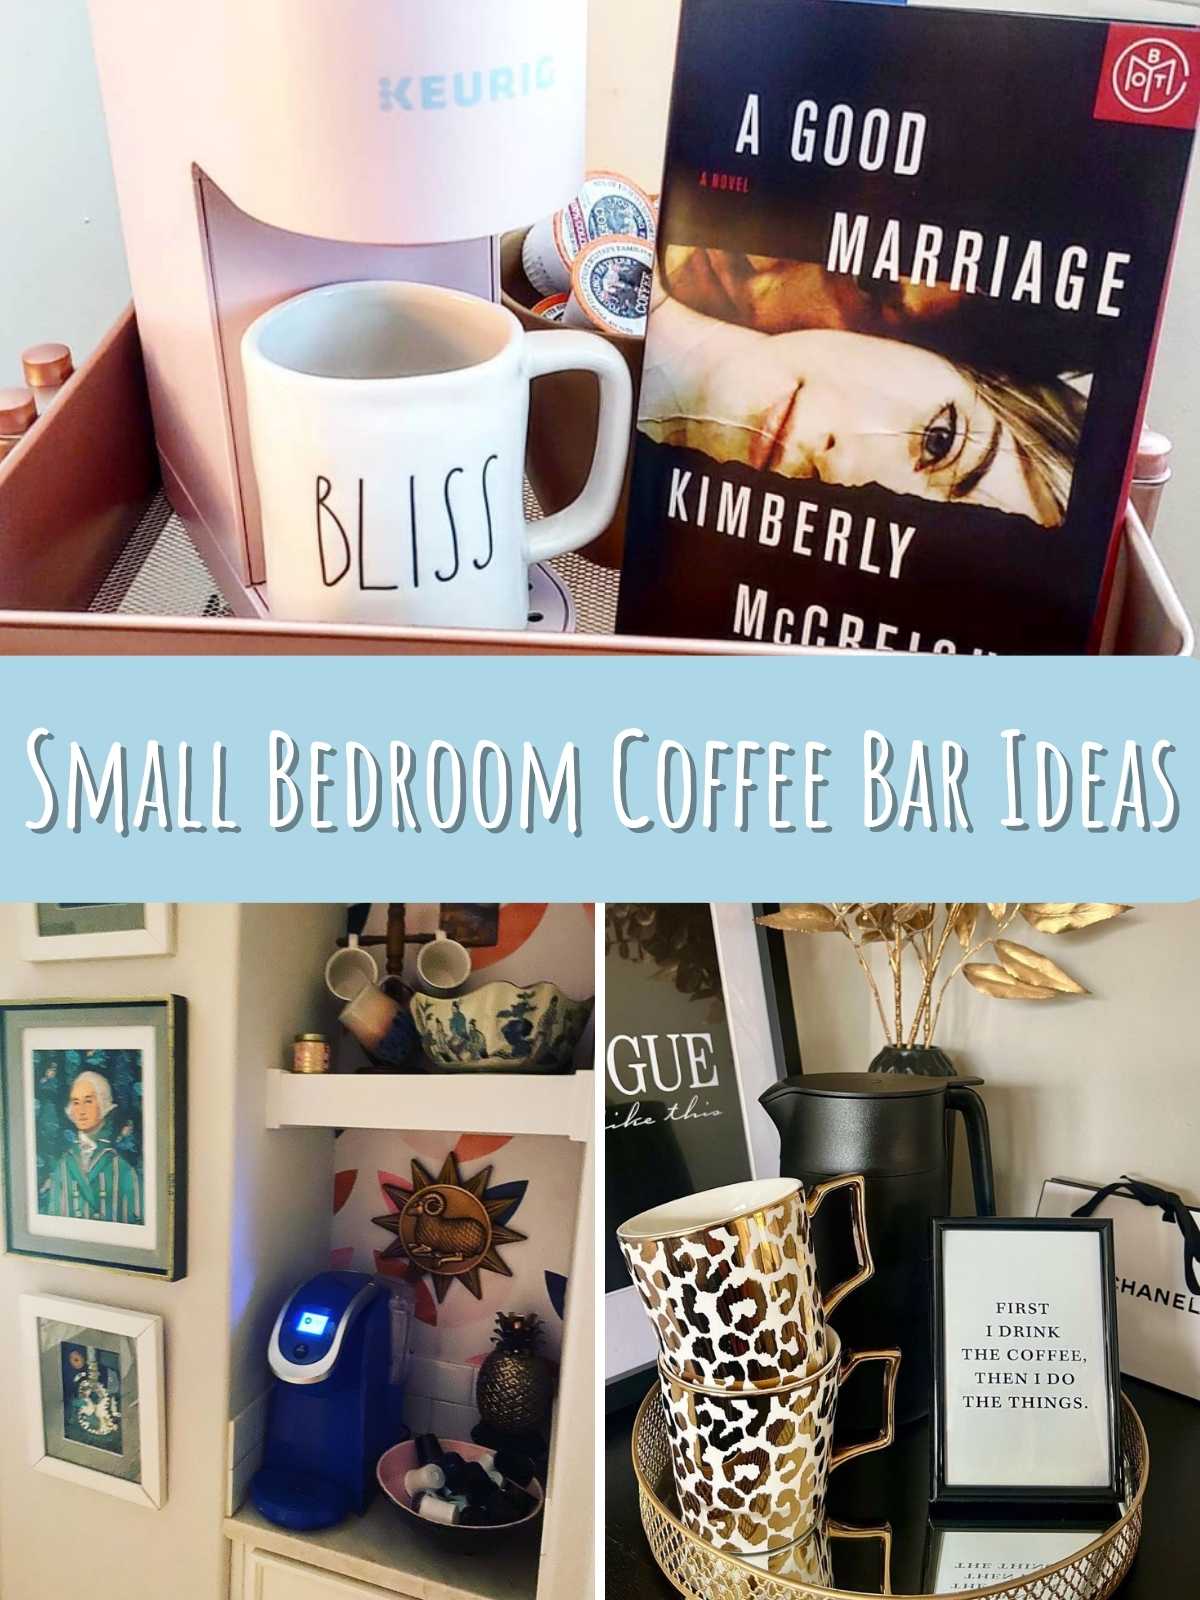 Small bedroom coffee bar ideas. 3 different photo examples of small coffee bars.